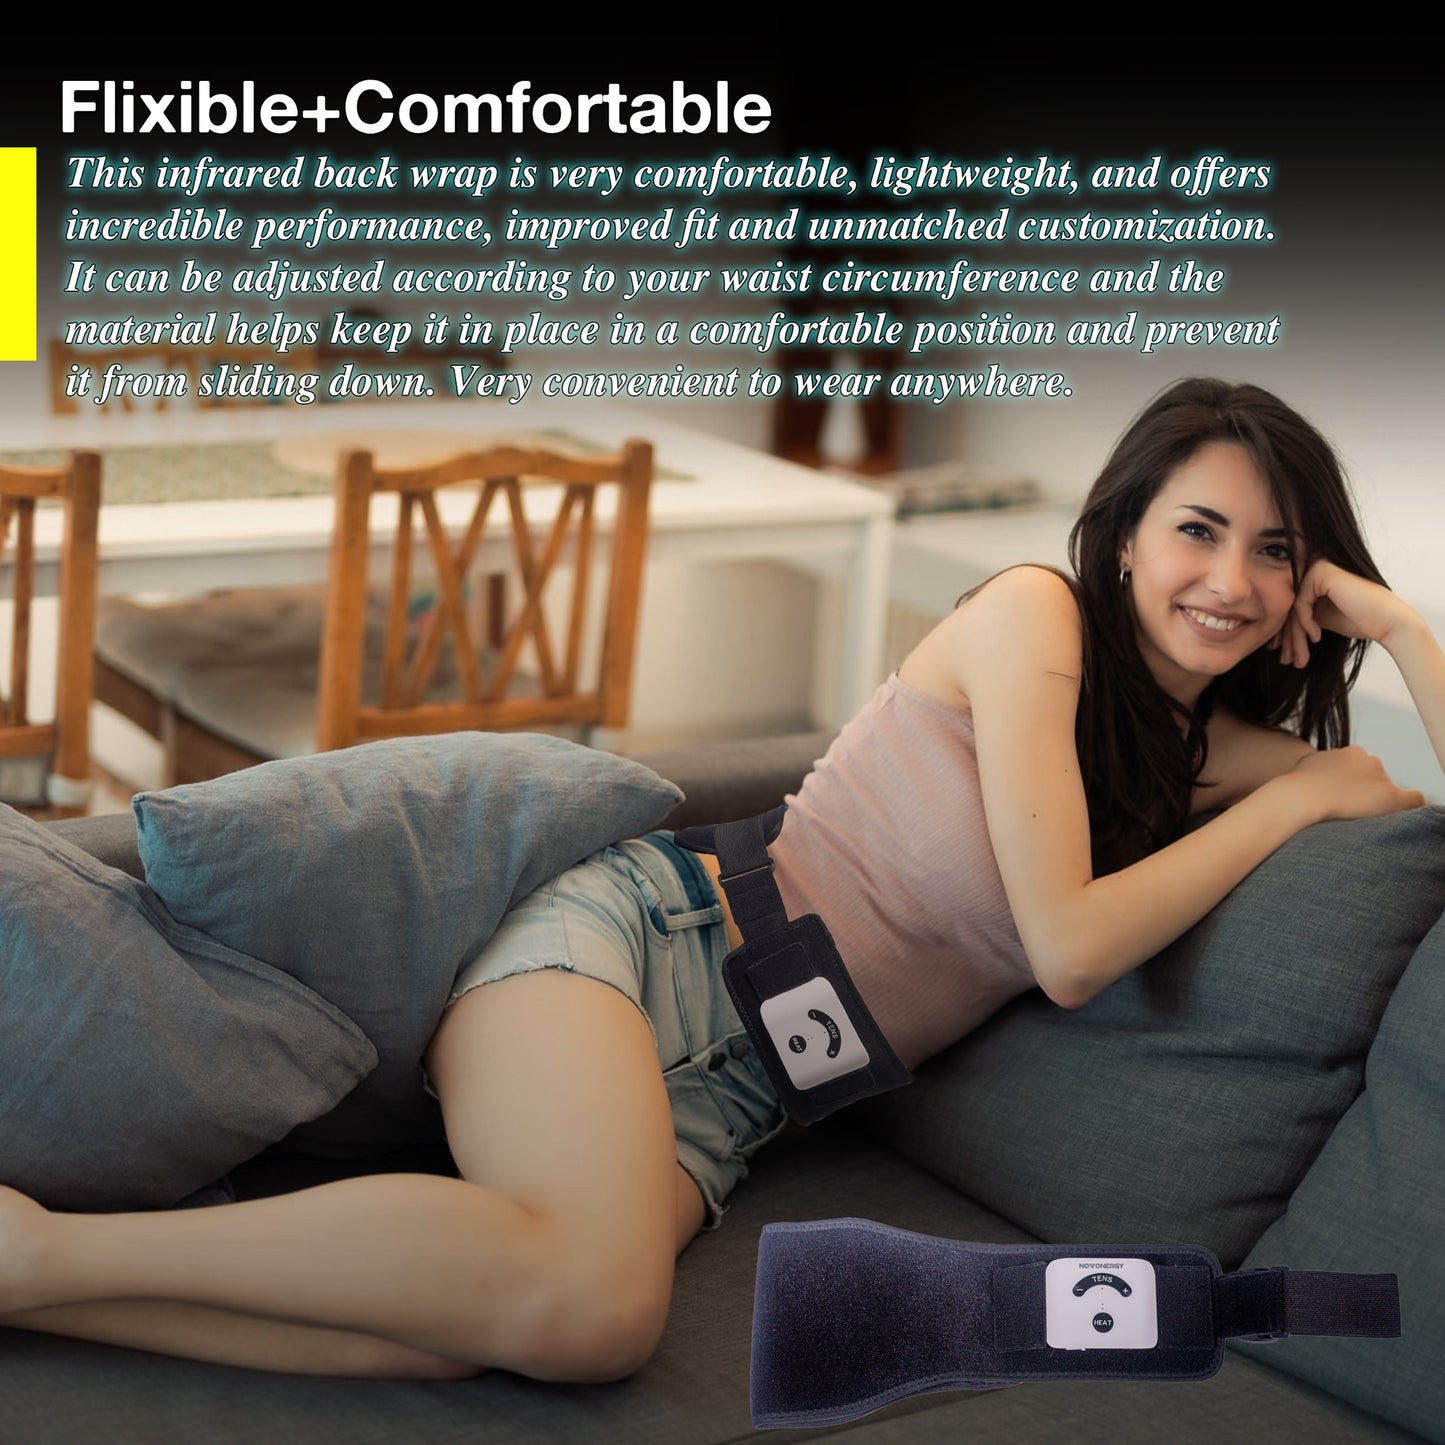 All-in-One TENS Massage Pad